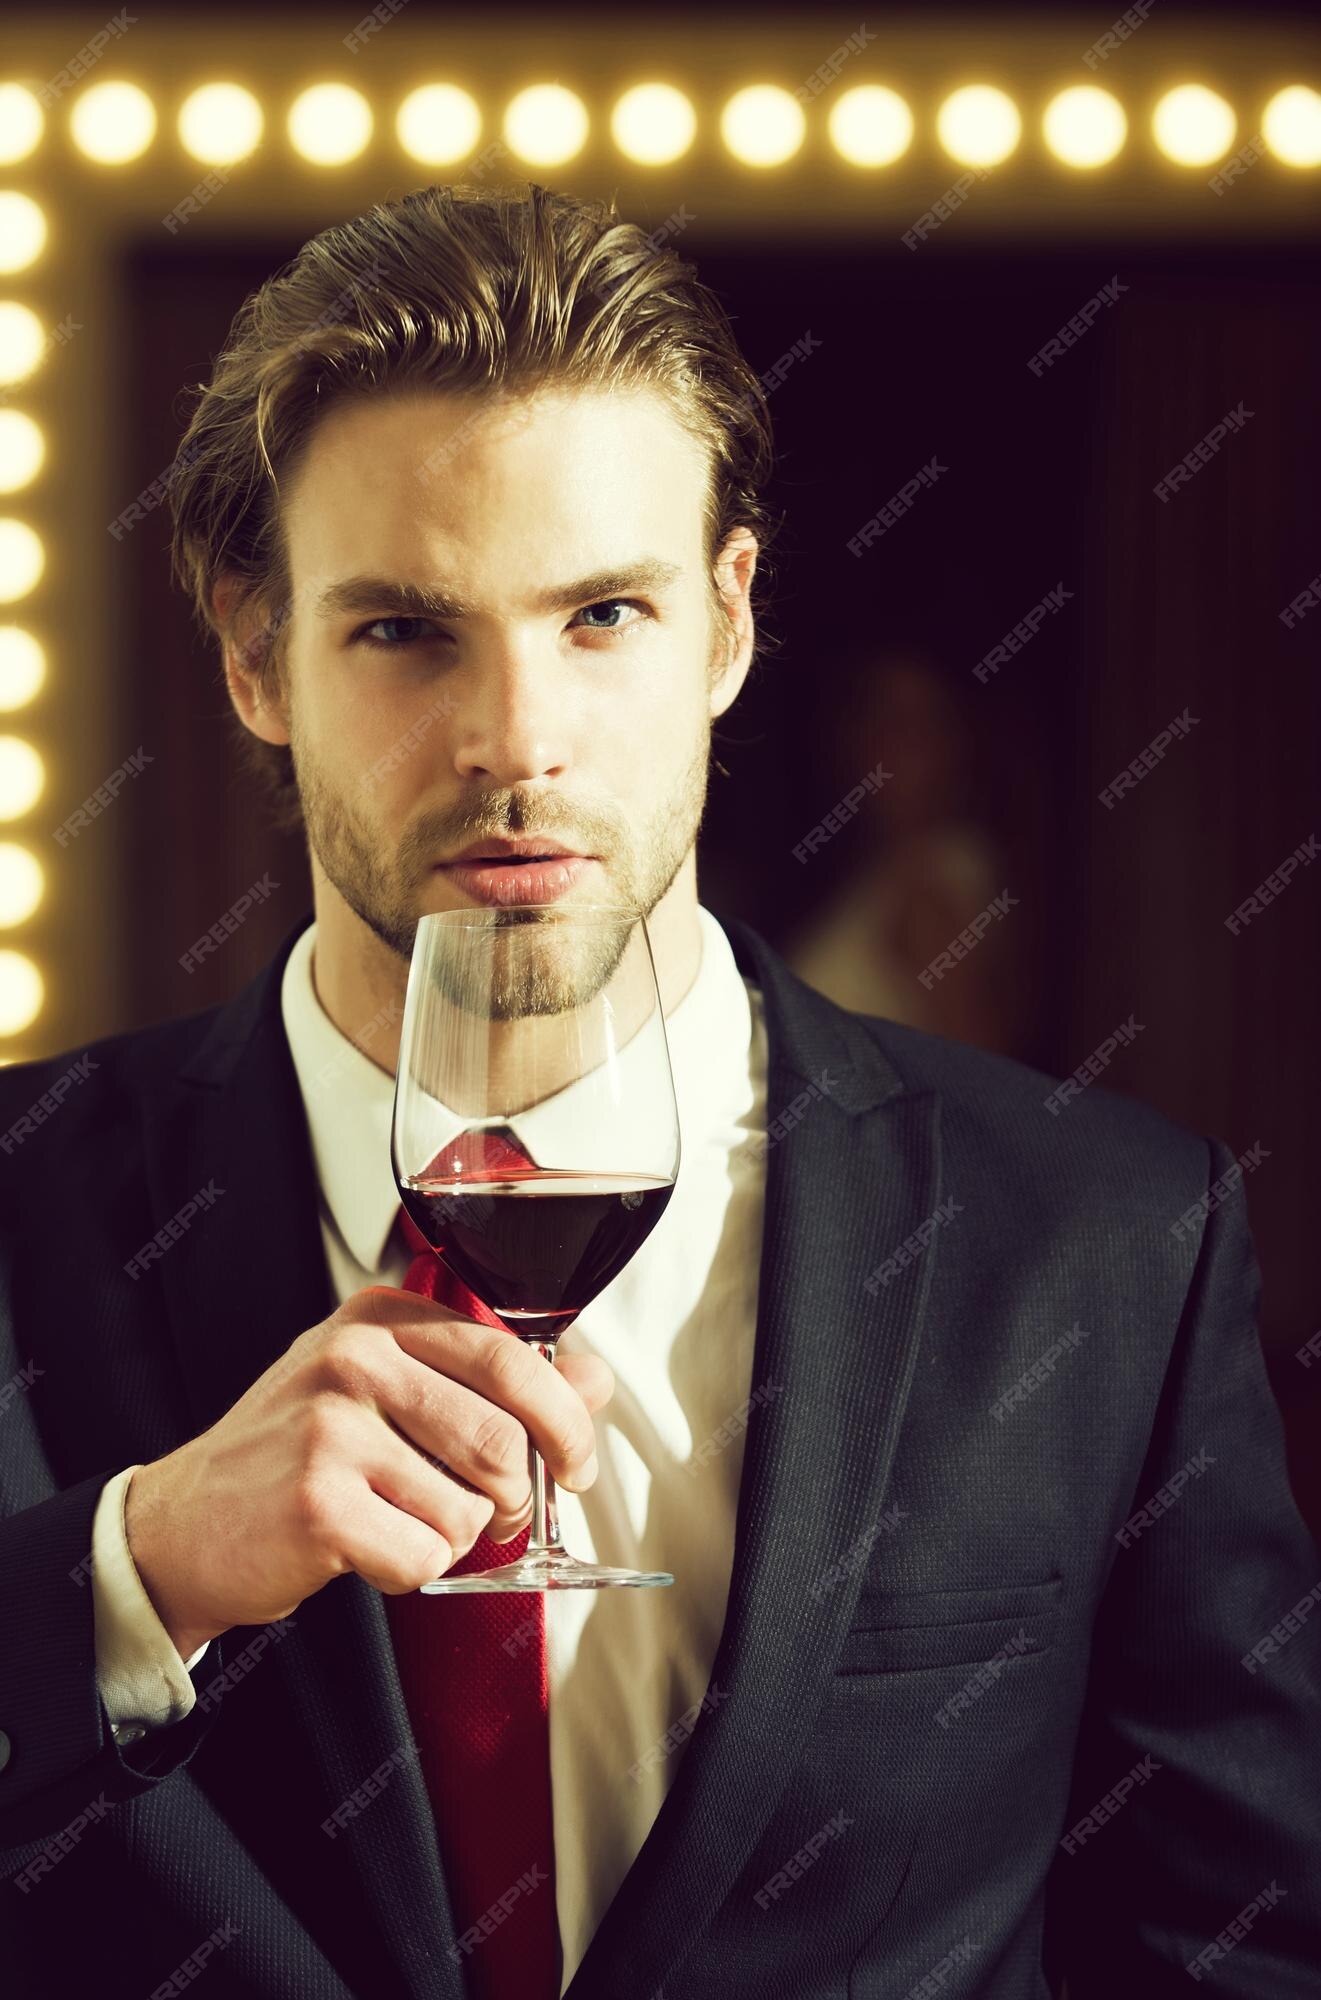 Premium Photo  Young man in formal outfit with red tie hold wine glass  near woman.